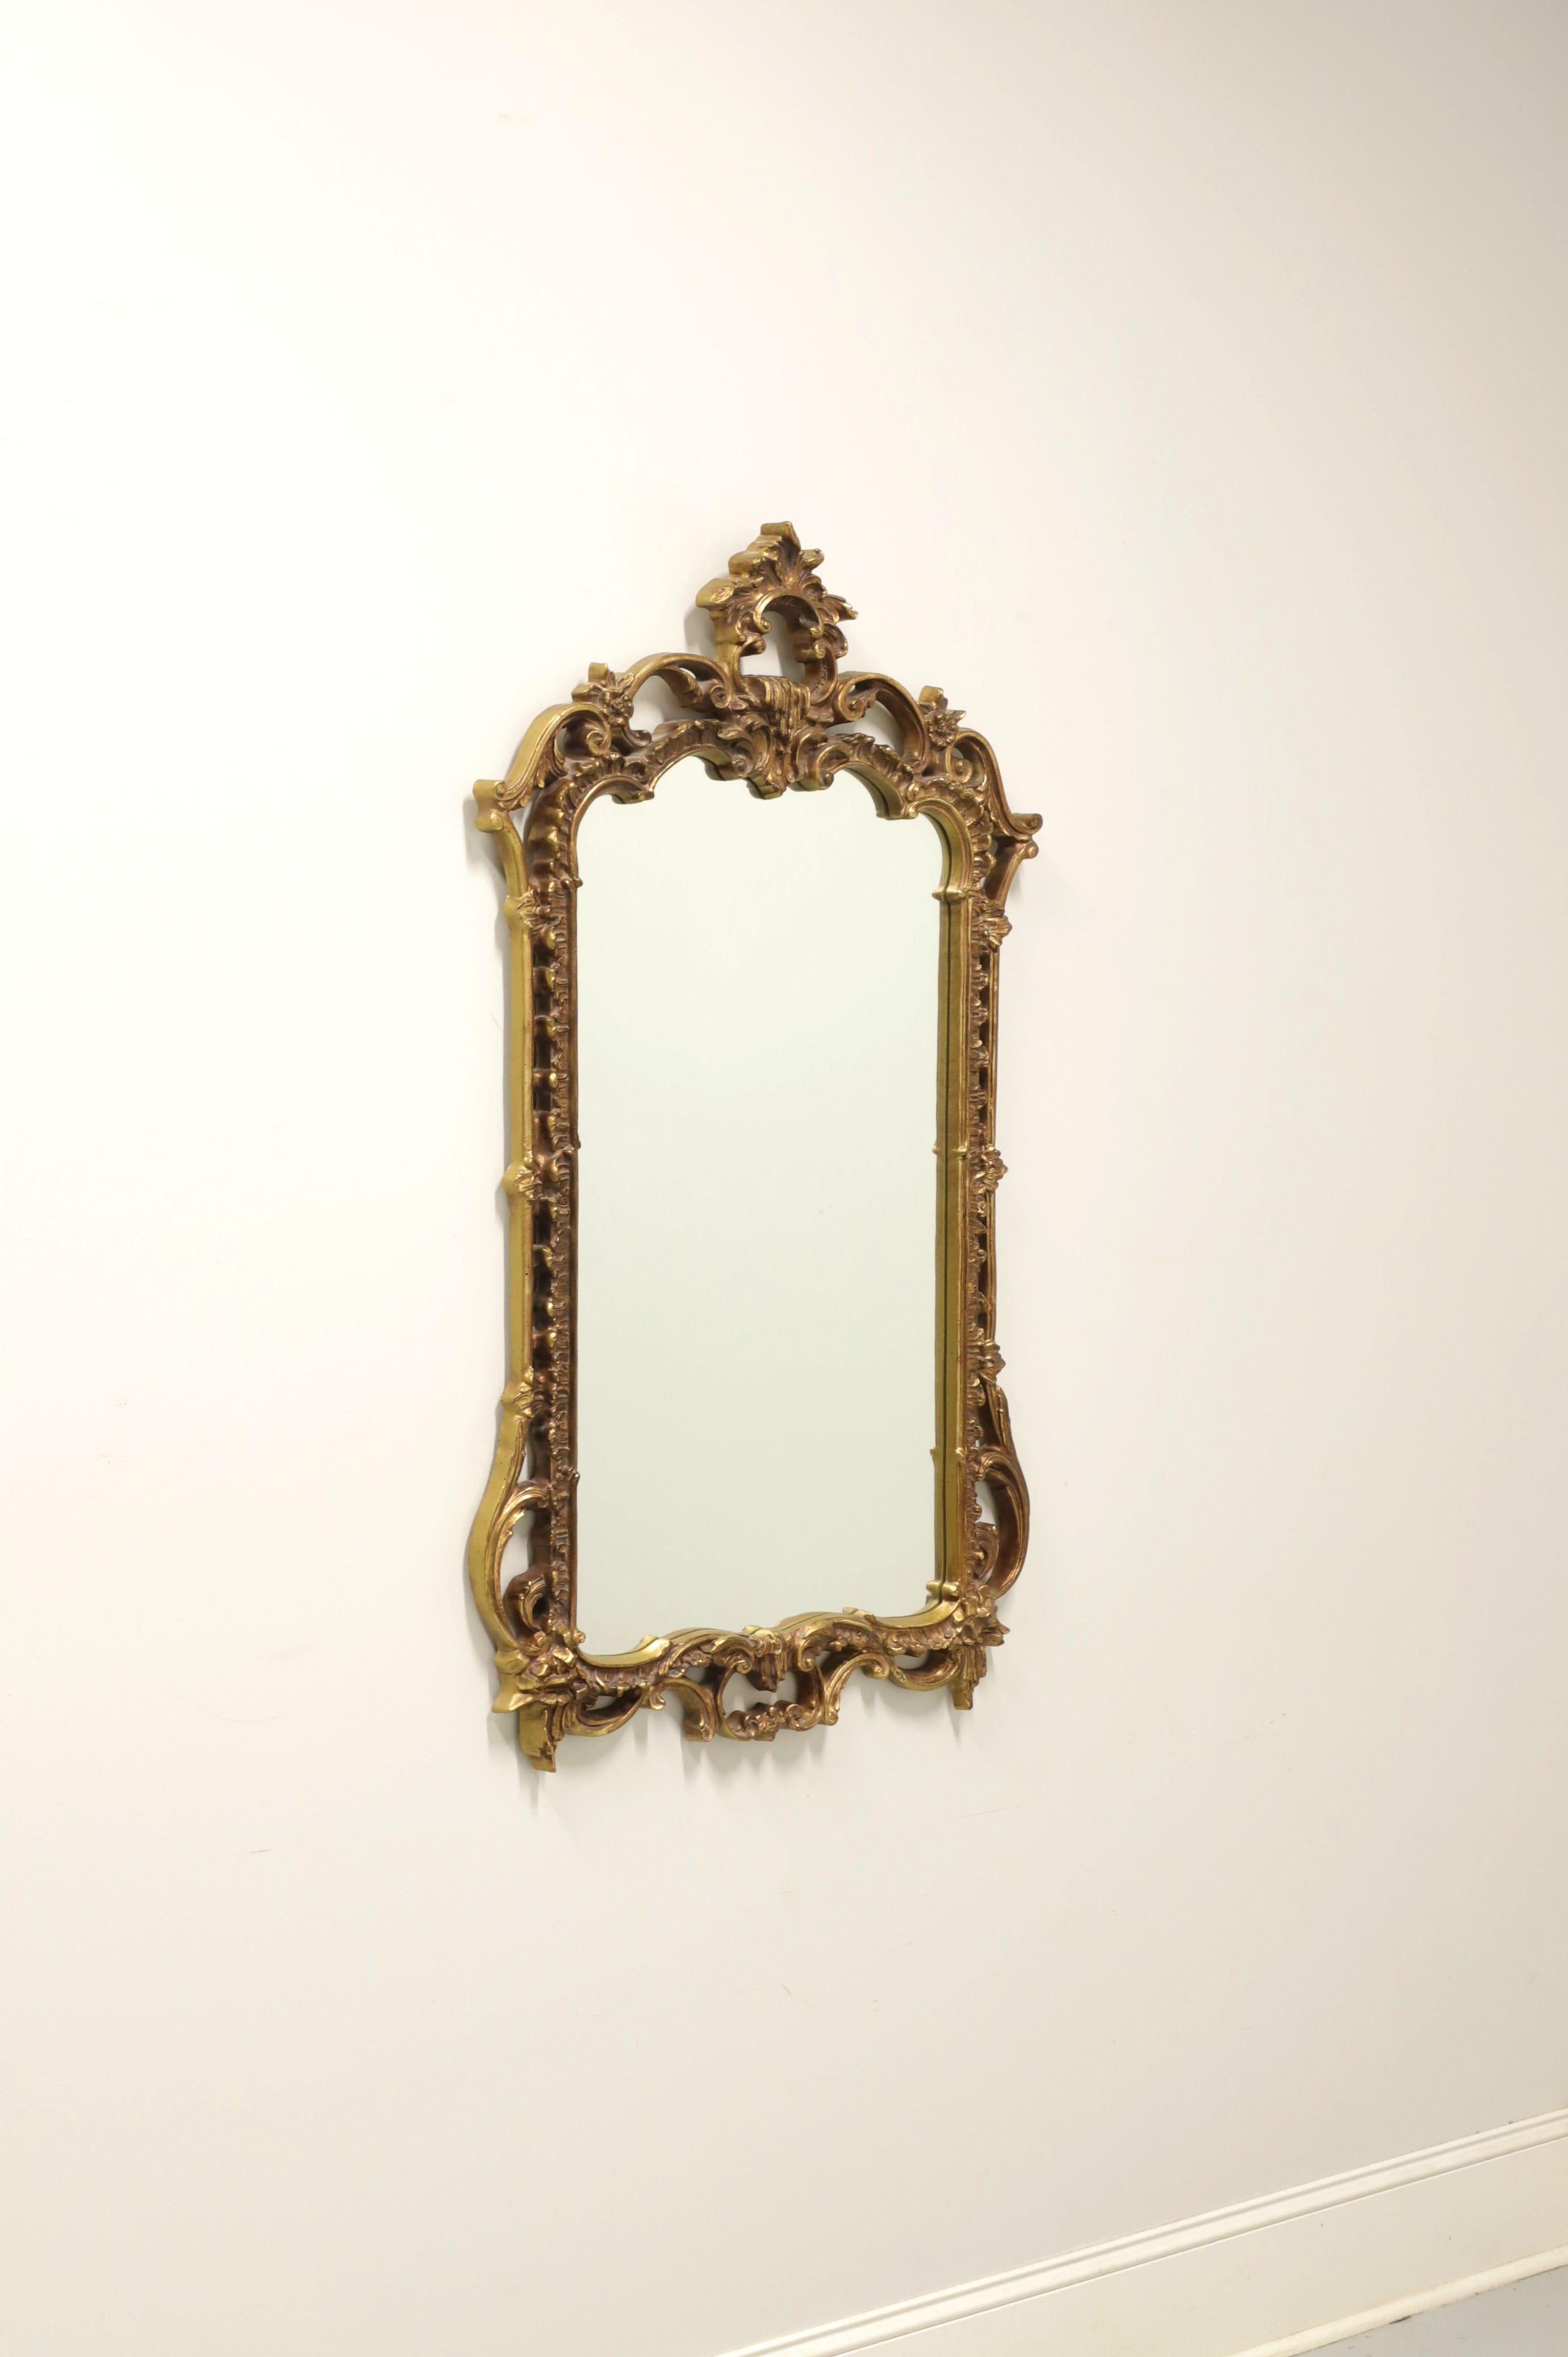 A Rococo style wall mirror by Carolina Mirror. Mirror glass in an intricately molded gold gilt painted composite frame with leaves to top center and floral accents throughout. Made in North Carolina, USA, in the late 20th Century.

Measures: 27.75w